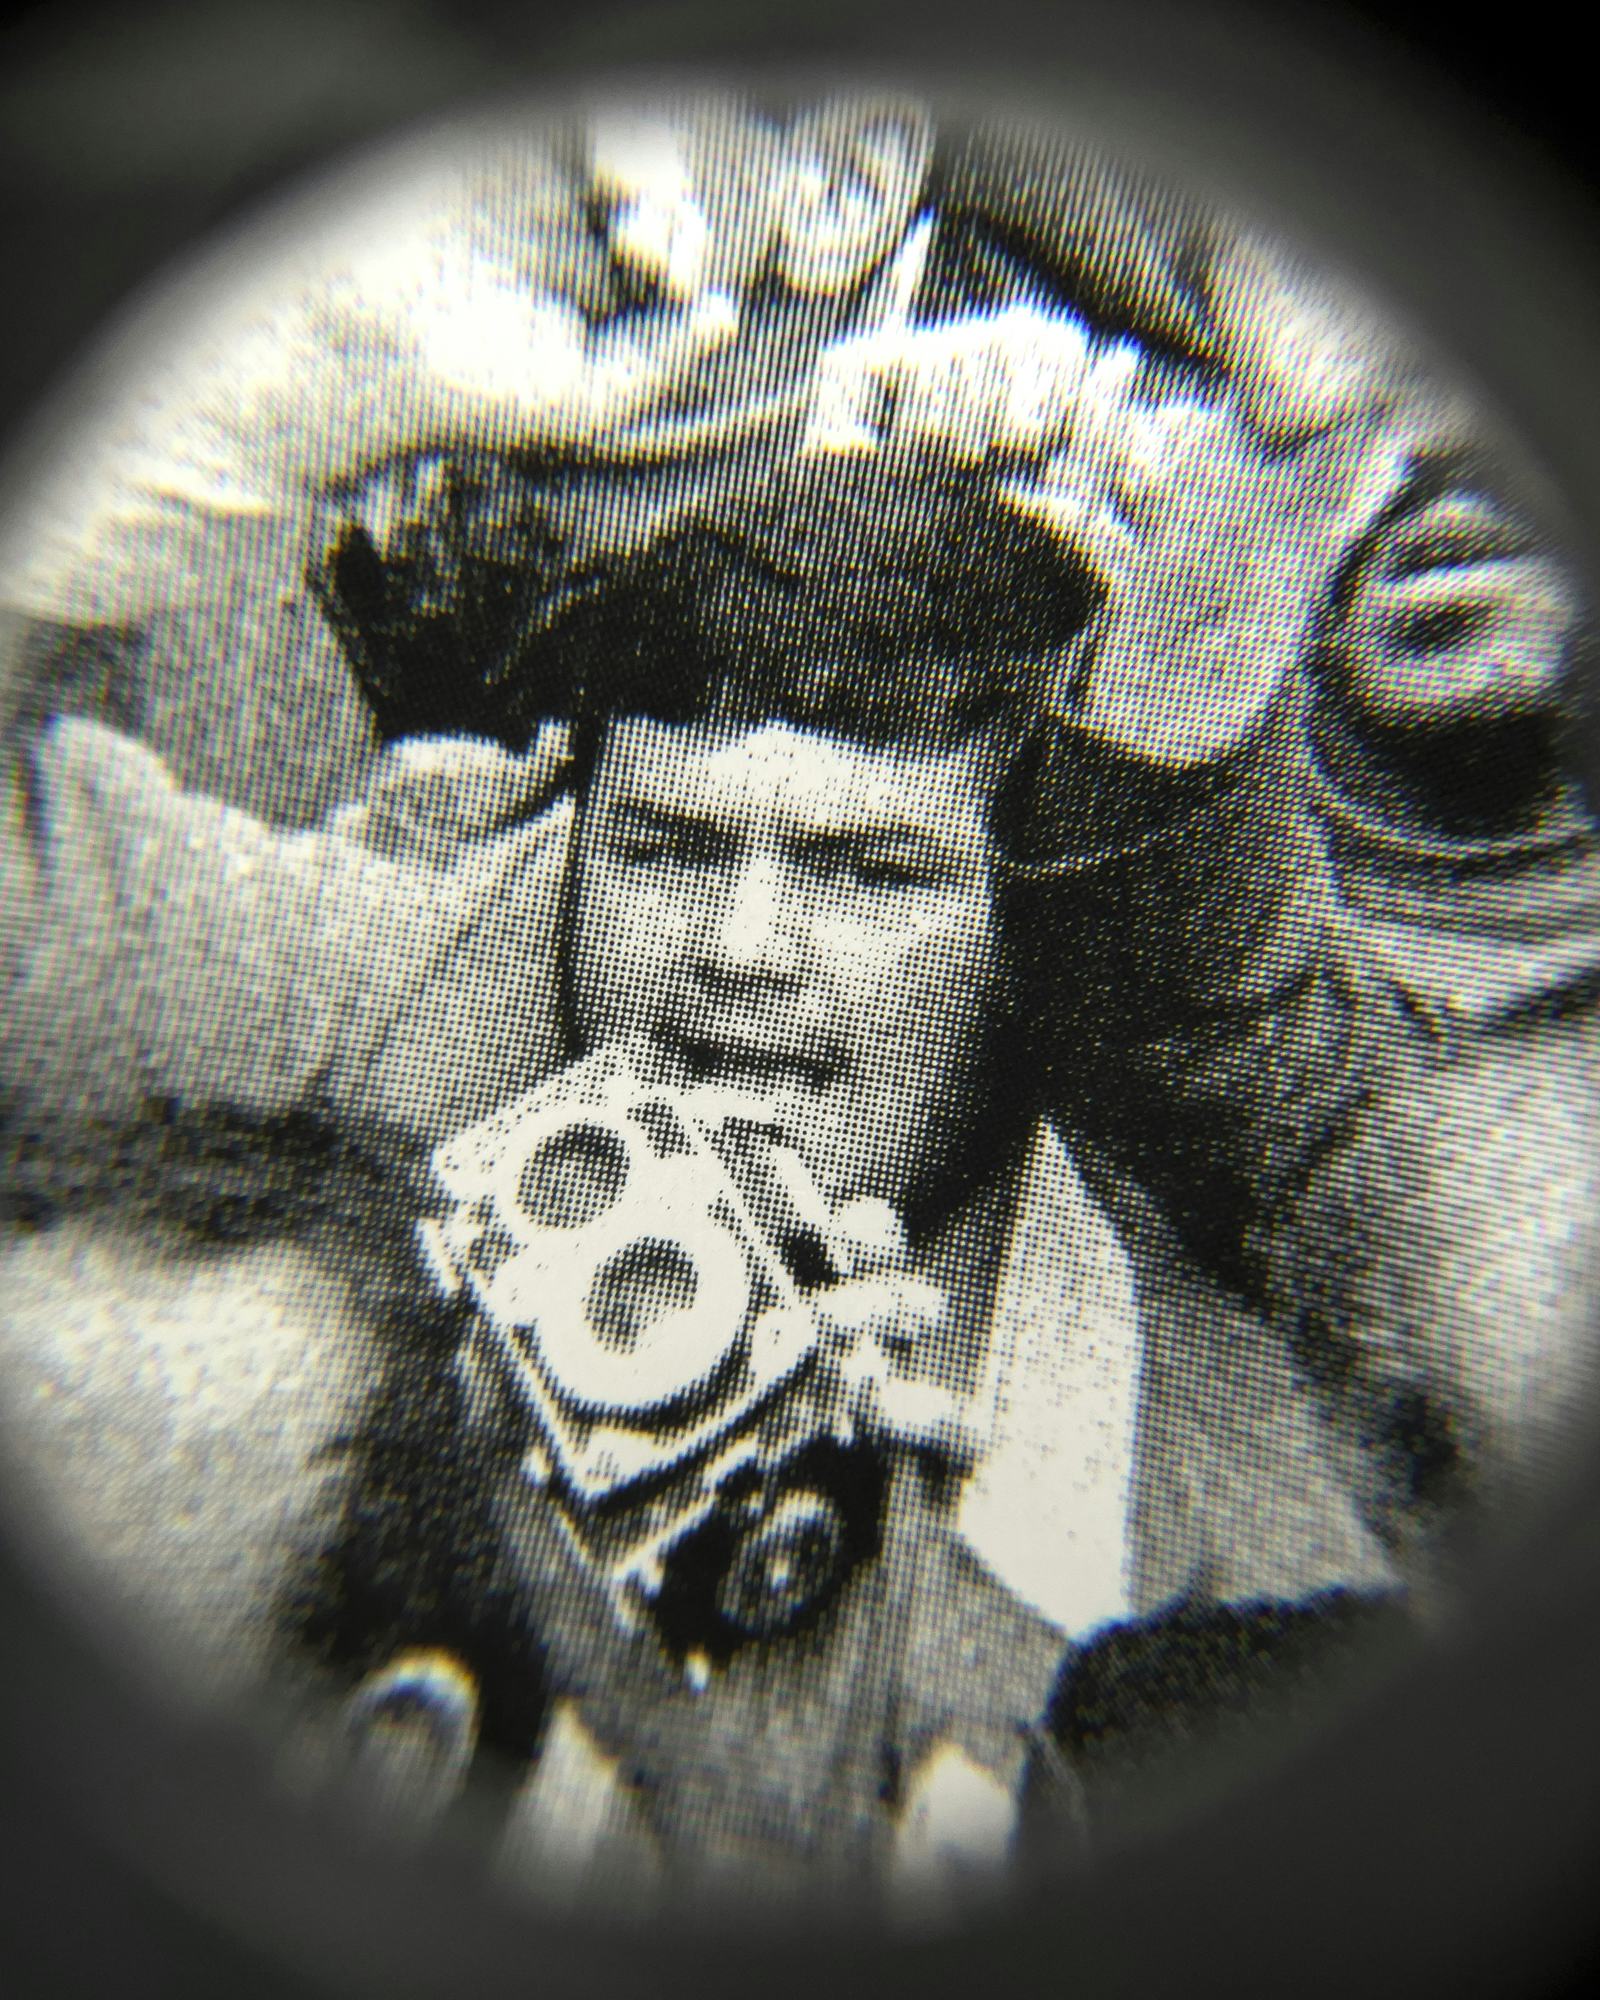 Black and white close-up image of an existing photograph, showing a man, holding a camera in the middle of a protesting crowd, staring into the camera. Shot through a magnifying lens © Amin Yousefi